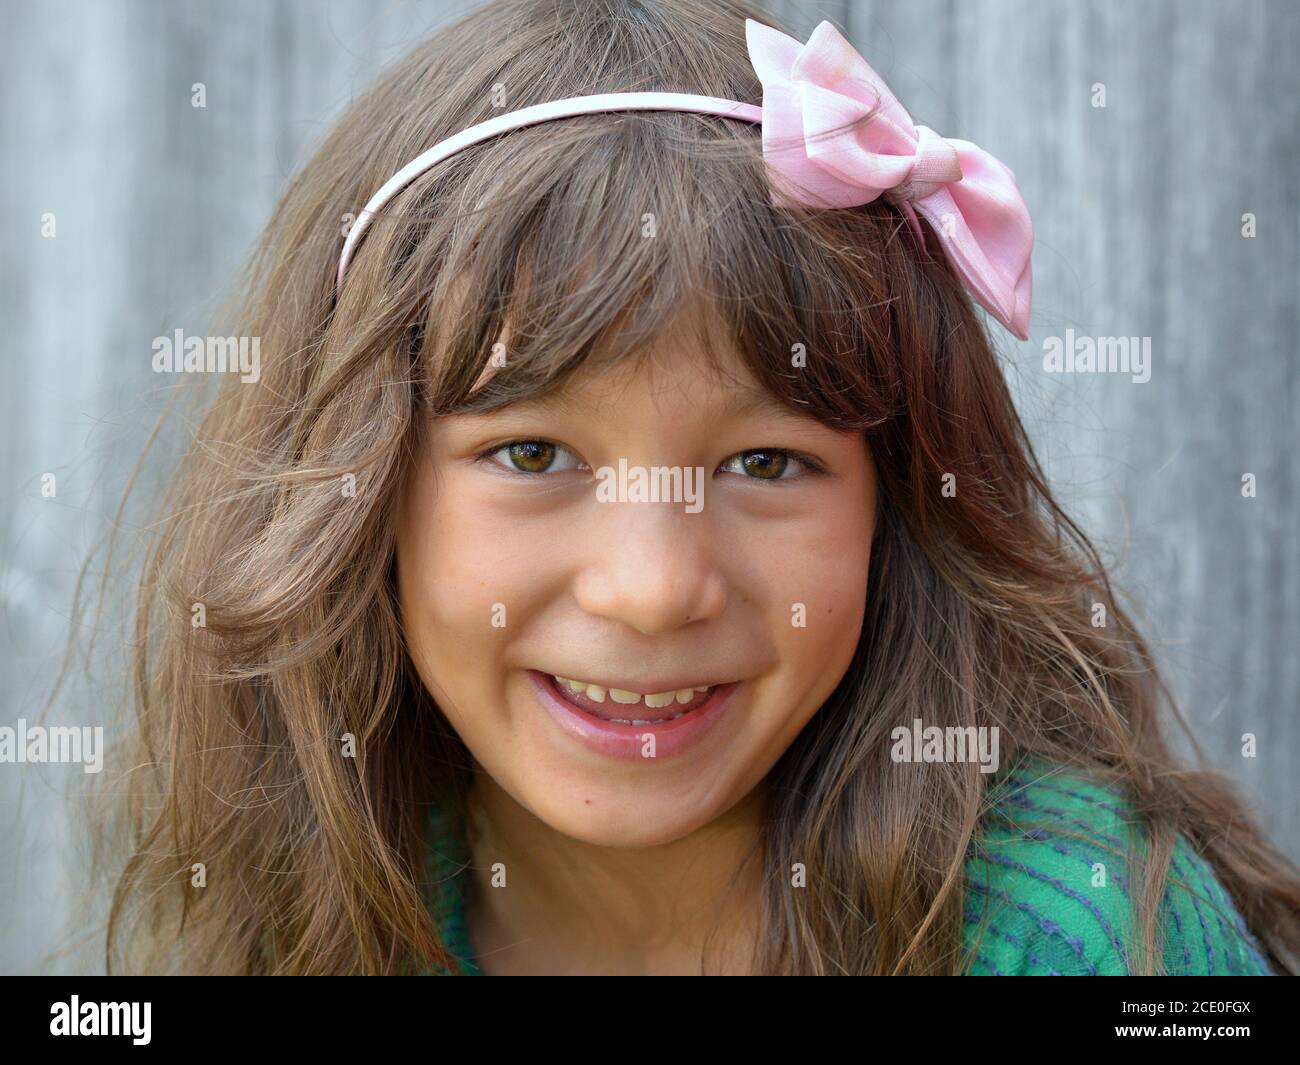 Cute little mixed race tween girl (Caucasian and East Asian) with pink bow-knot headband smiles for the camera. Stock Photo